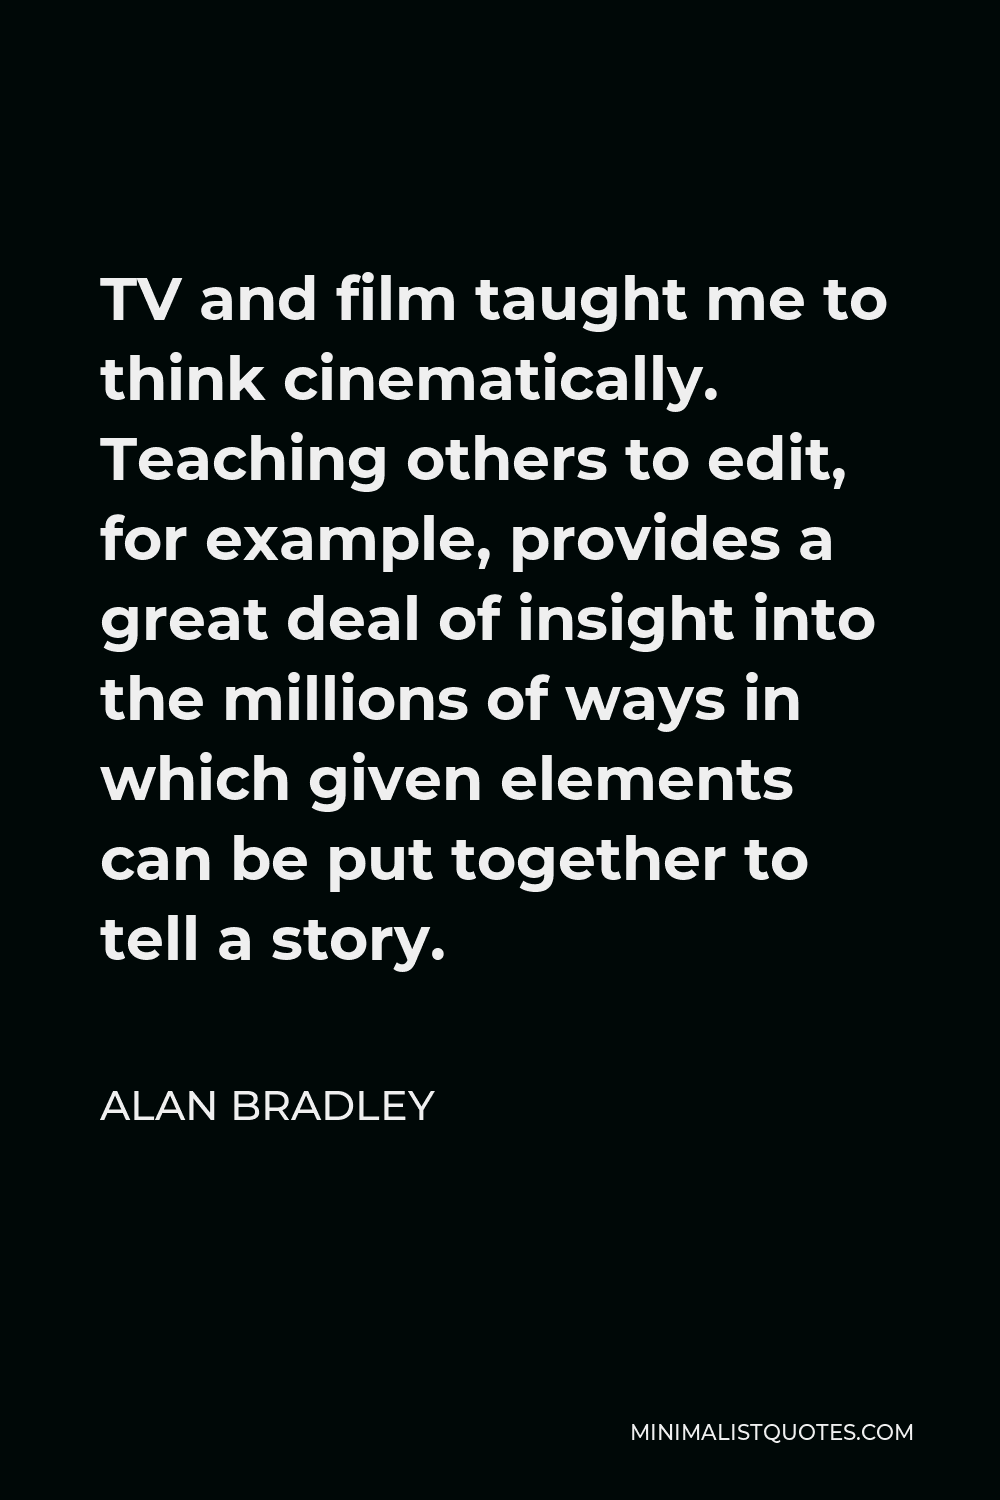 Alan Bradley Quote - TV and film taught me to think cinematically. Teaching others to edit, for example, provides a great deal of insight into the millions of ways in which given elements can be put together to tell a story.